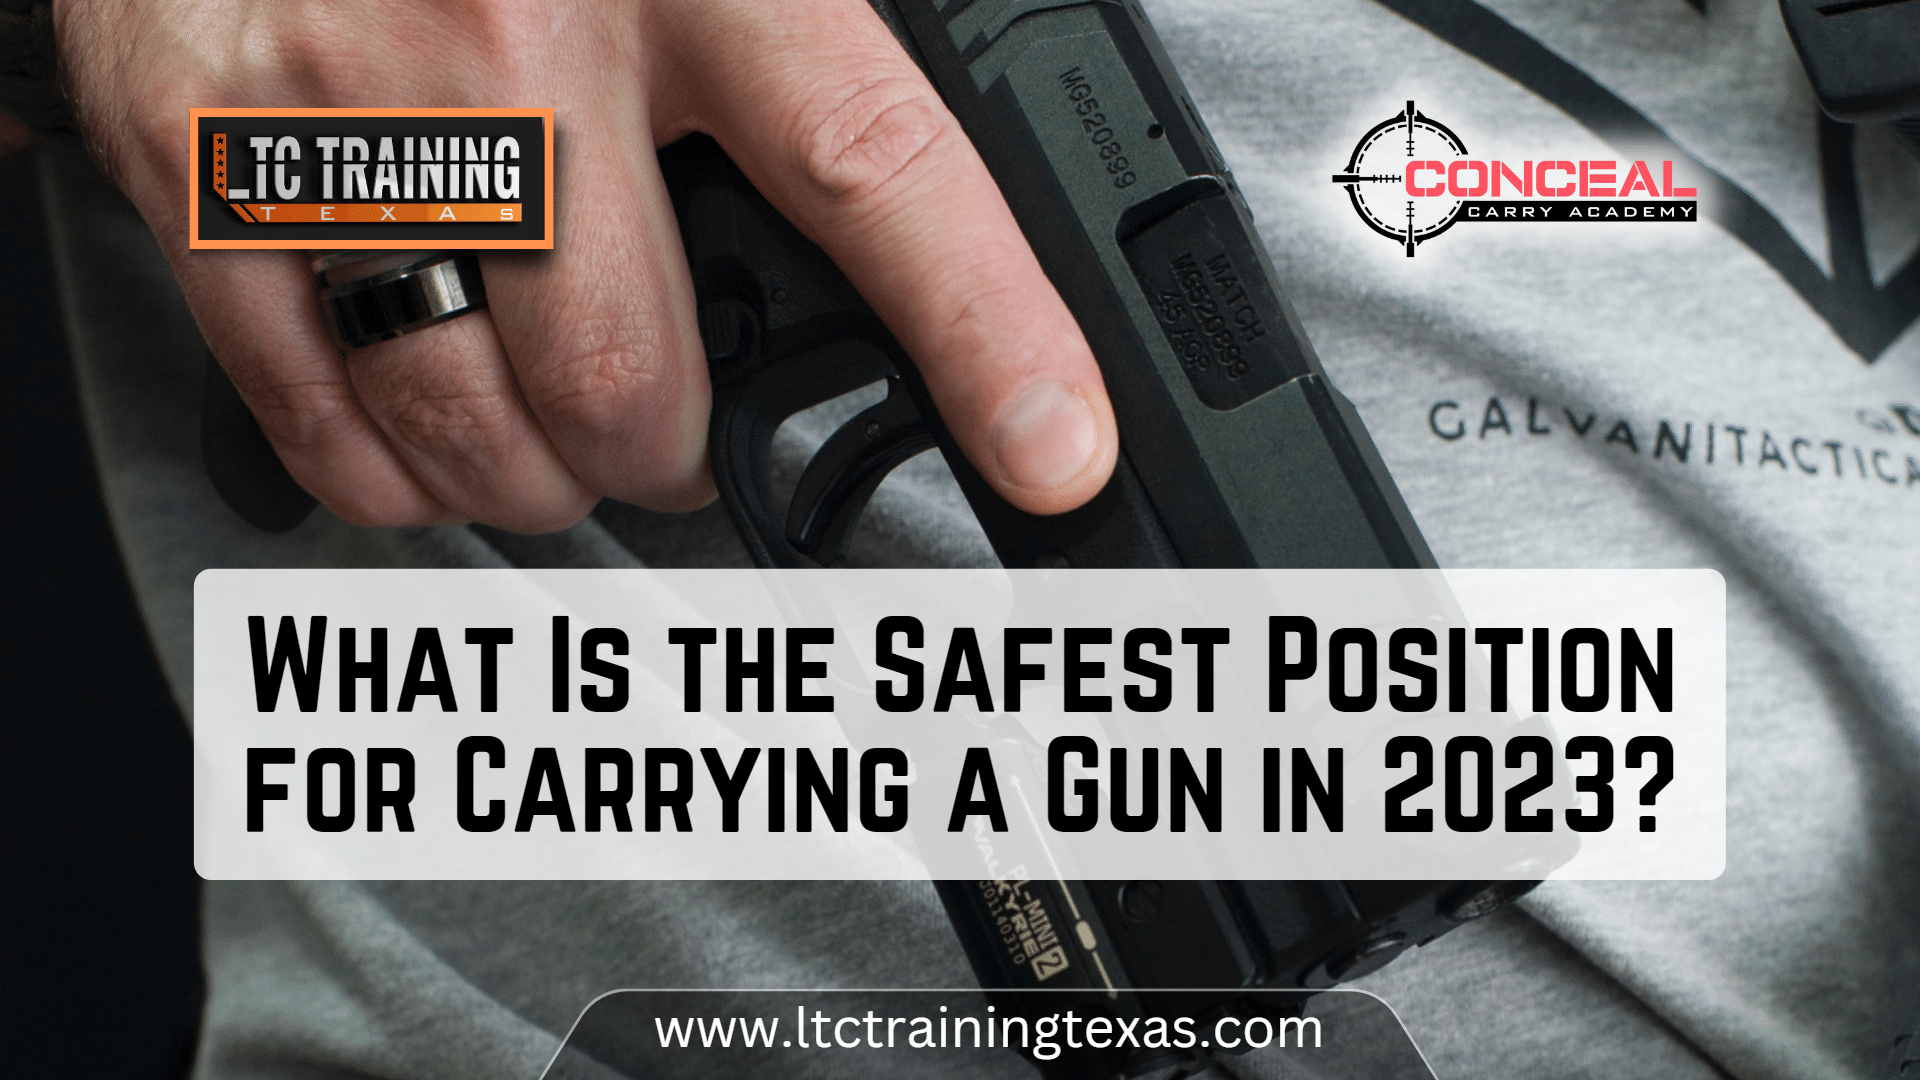 What Is the Safest Position for Carrying a Gun in 2023?